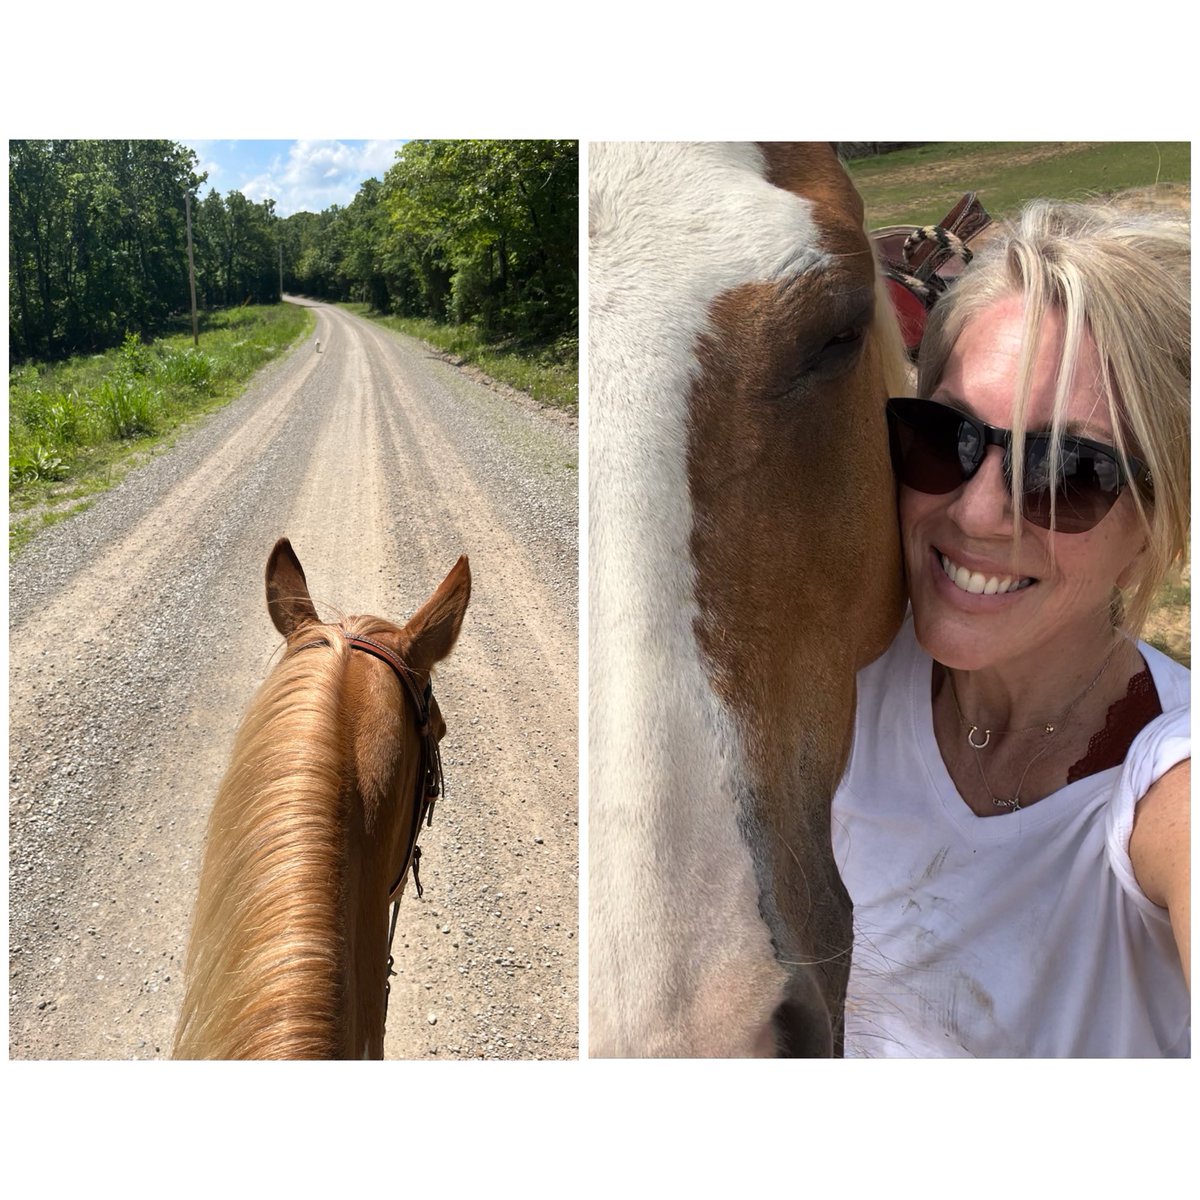 It was hot out here. That’s not a scenic pic, but Jed is leading the way and I wanted to get him in there. It makes me happy when Jed comes with Marshall and me because it reminds me how I found him out on a trail a few years ago. ☀️💕